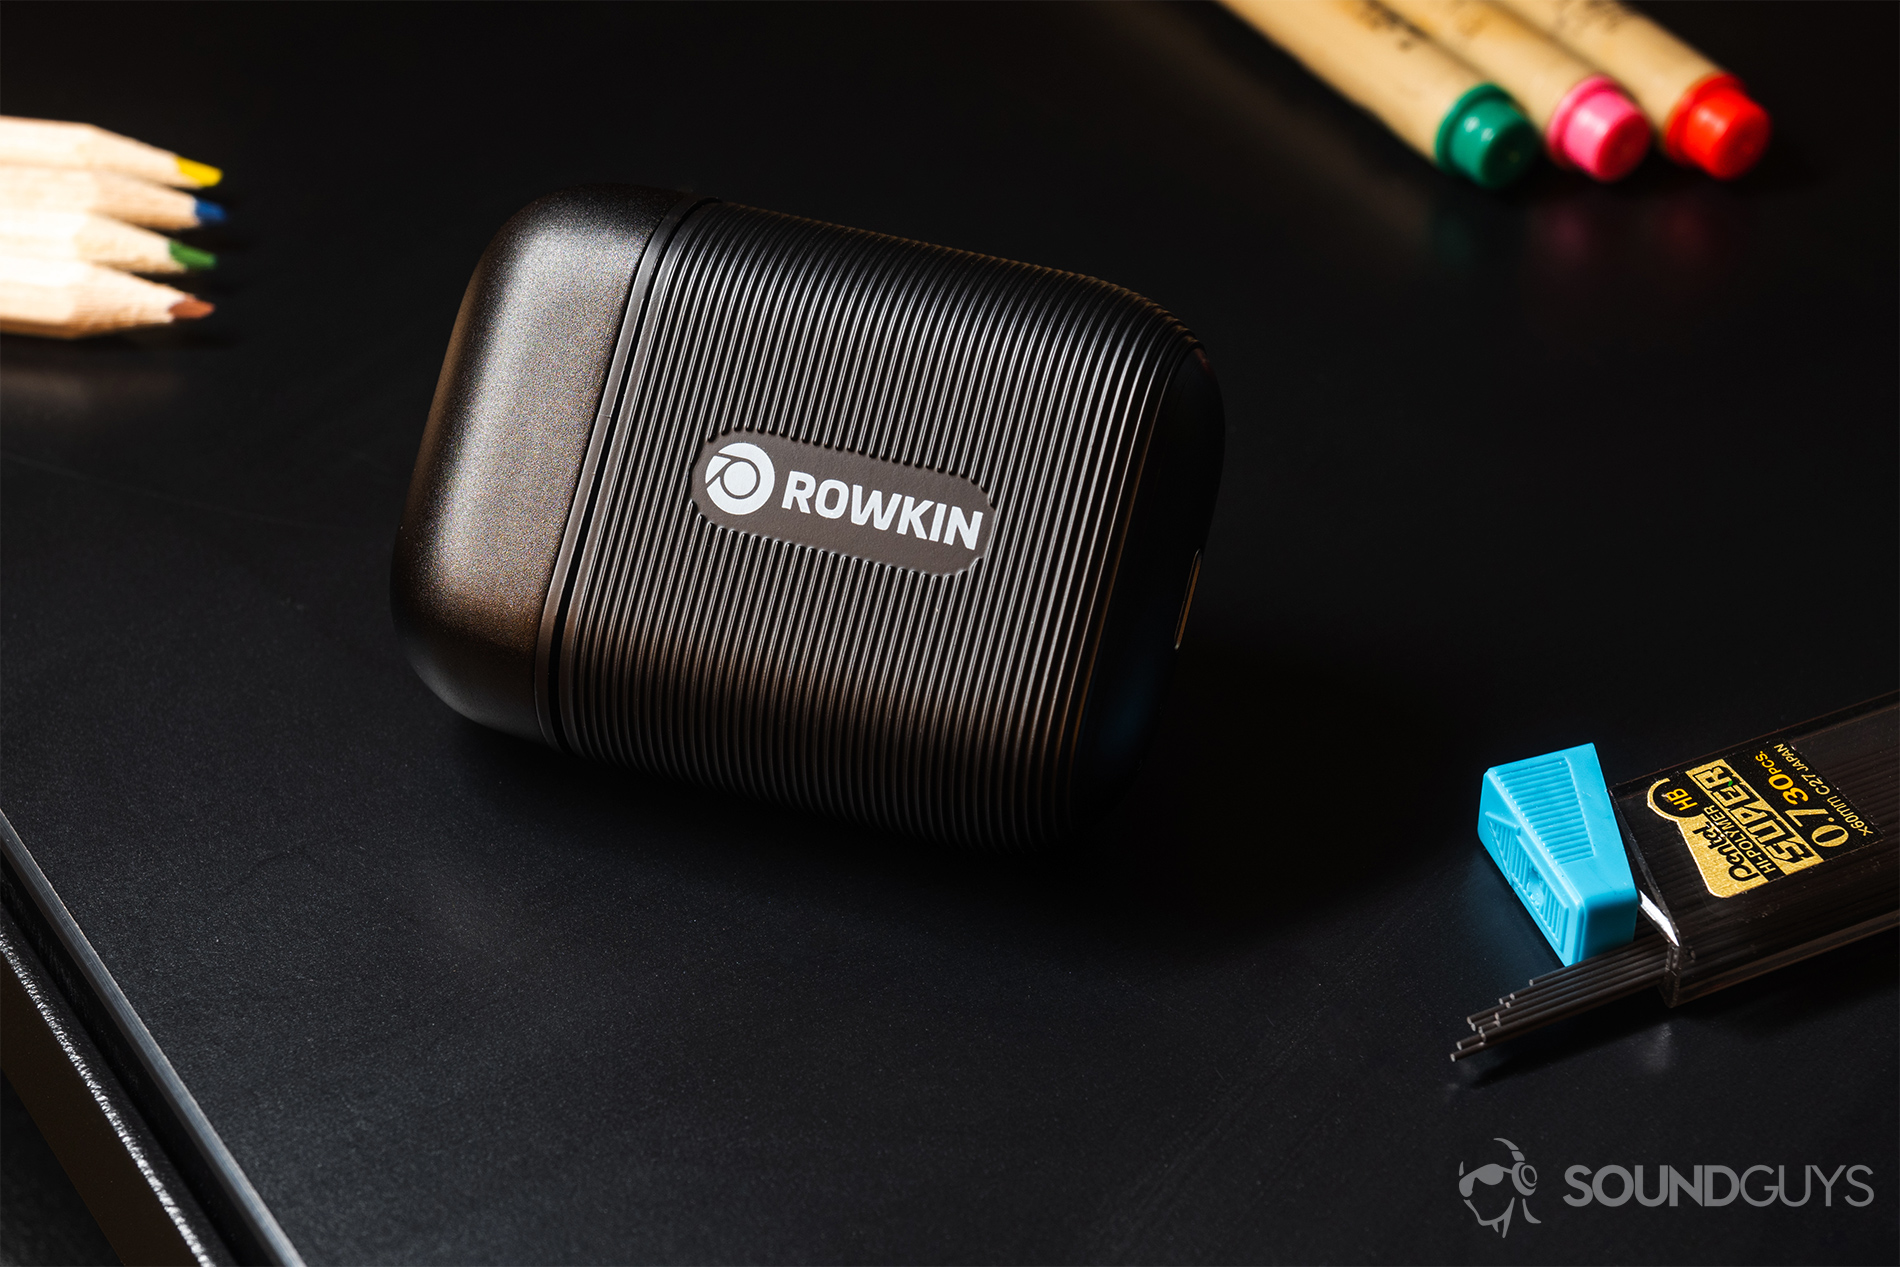 Rowkin Ascent Micro: The charging case with the Rowkin branding facing the lens. Pens, colored pencils, and lead are in the background.